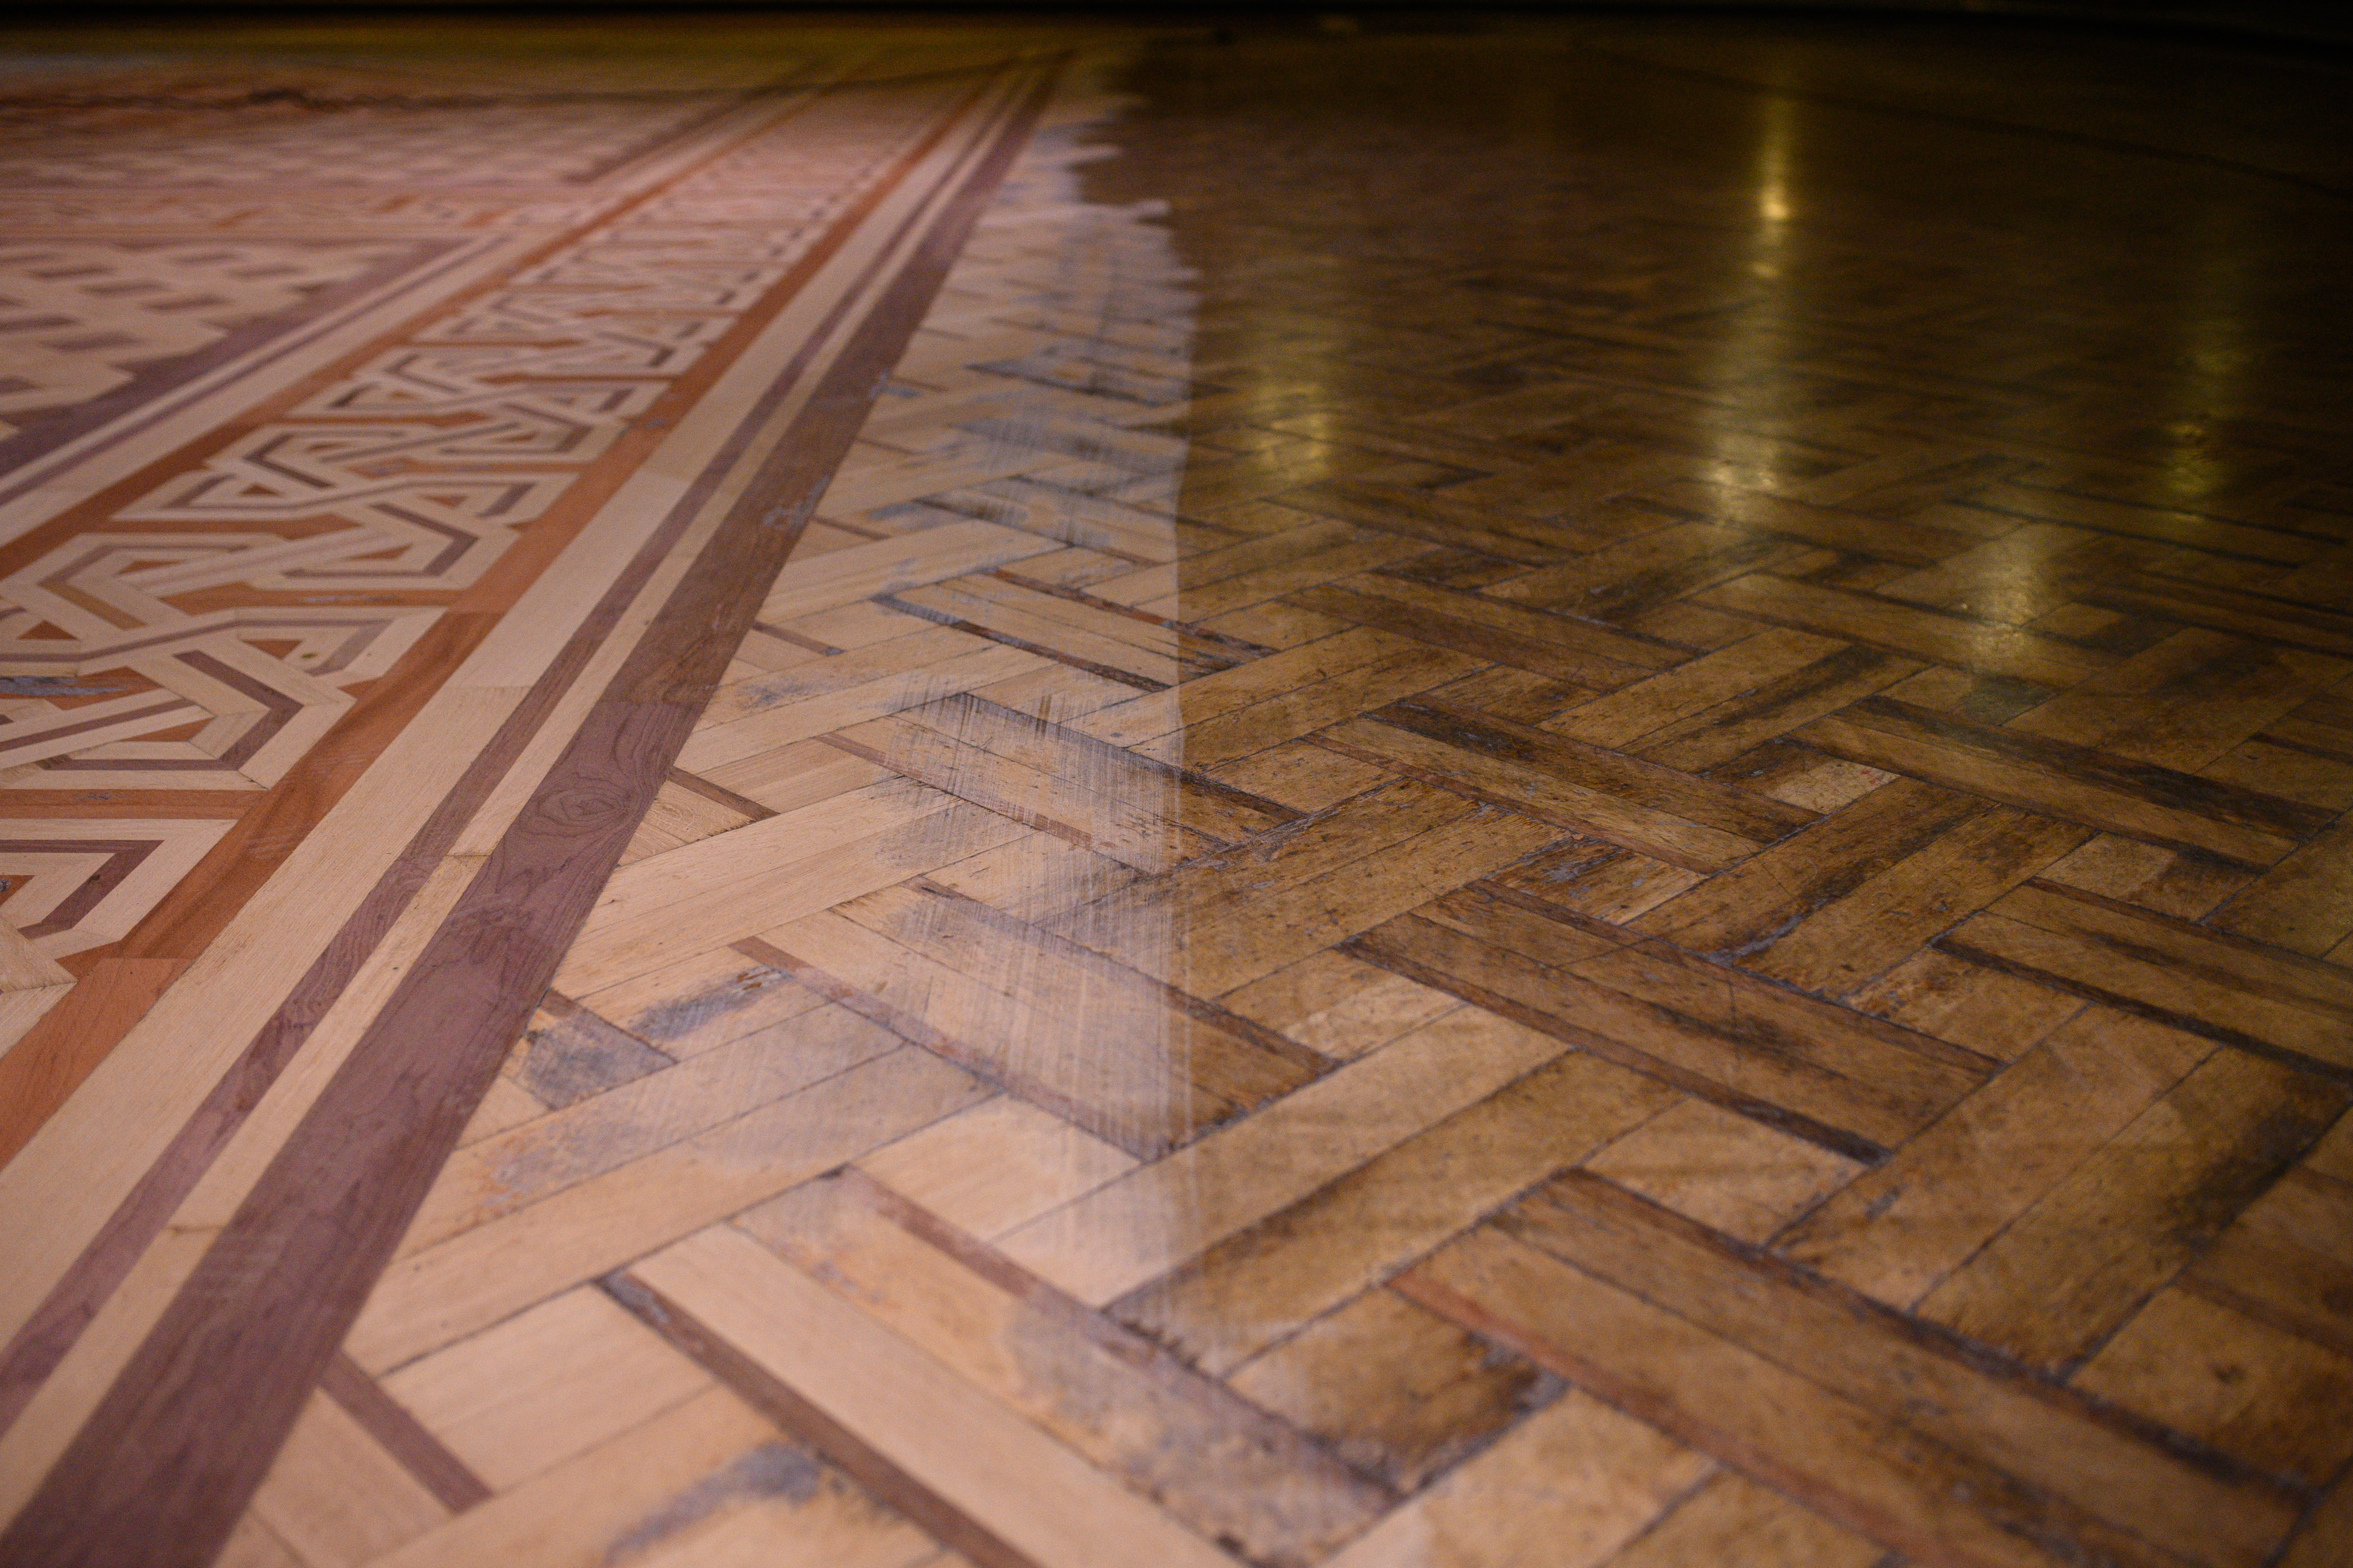 An example of the original and partially restored sections of the floor of the historic Blackpool Tower Ballroom as wood sanding technicians work to restore it to its former glory (Oli Scarff/Blackpool Tower/PA)